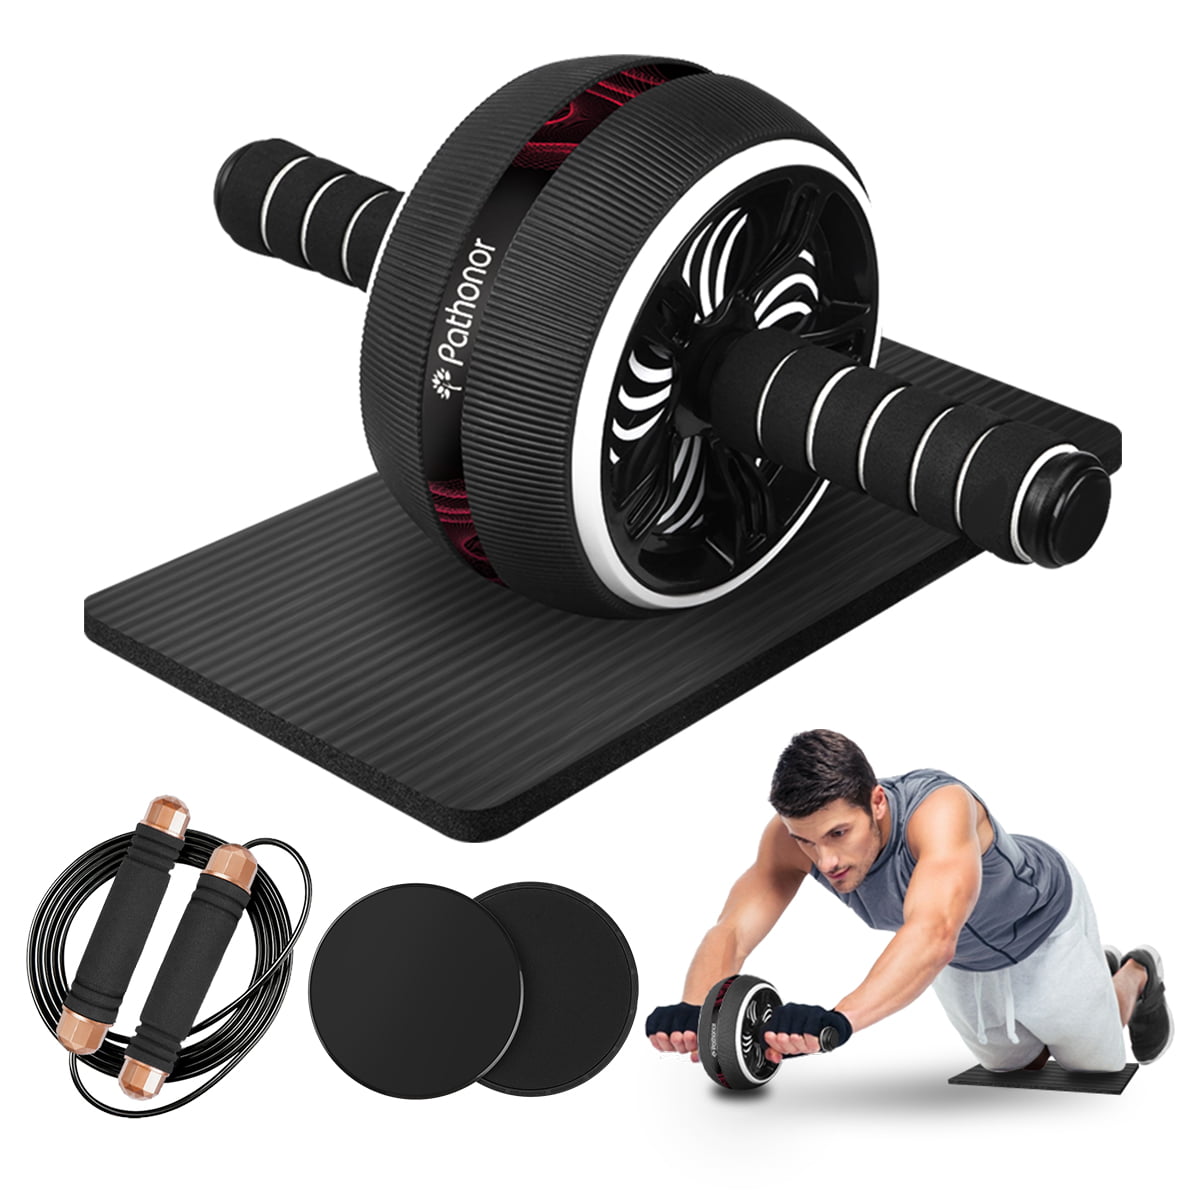 Abdominal workout Core fitness Gym Ab Roller Wheel with Knee Mat and Jump Rope 